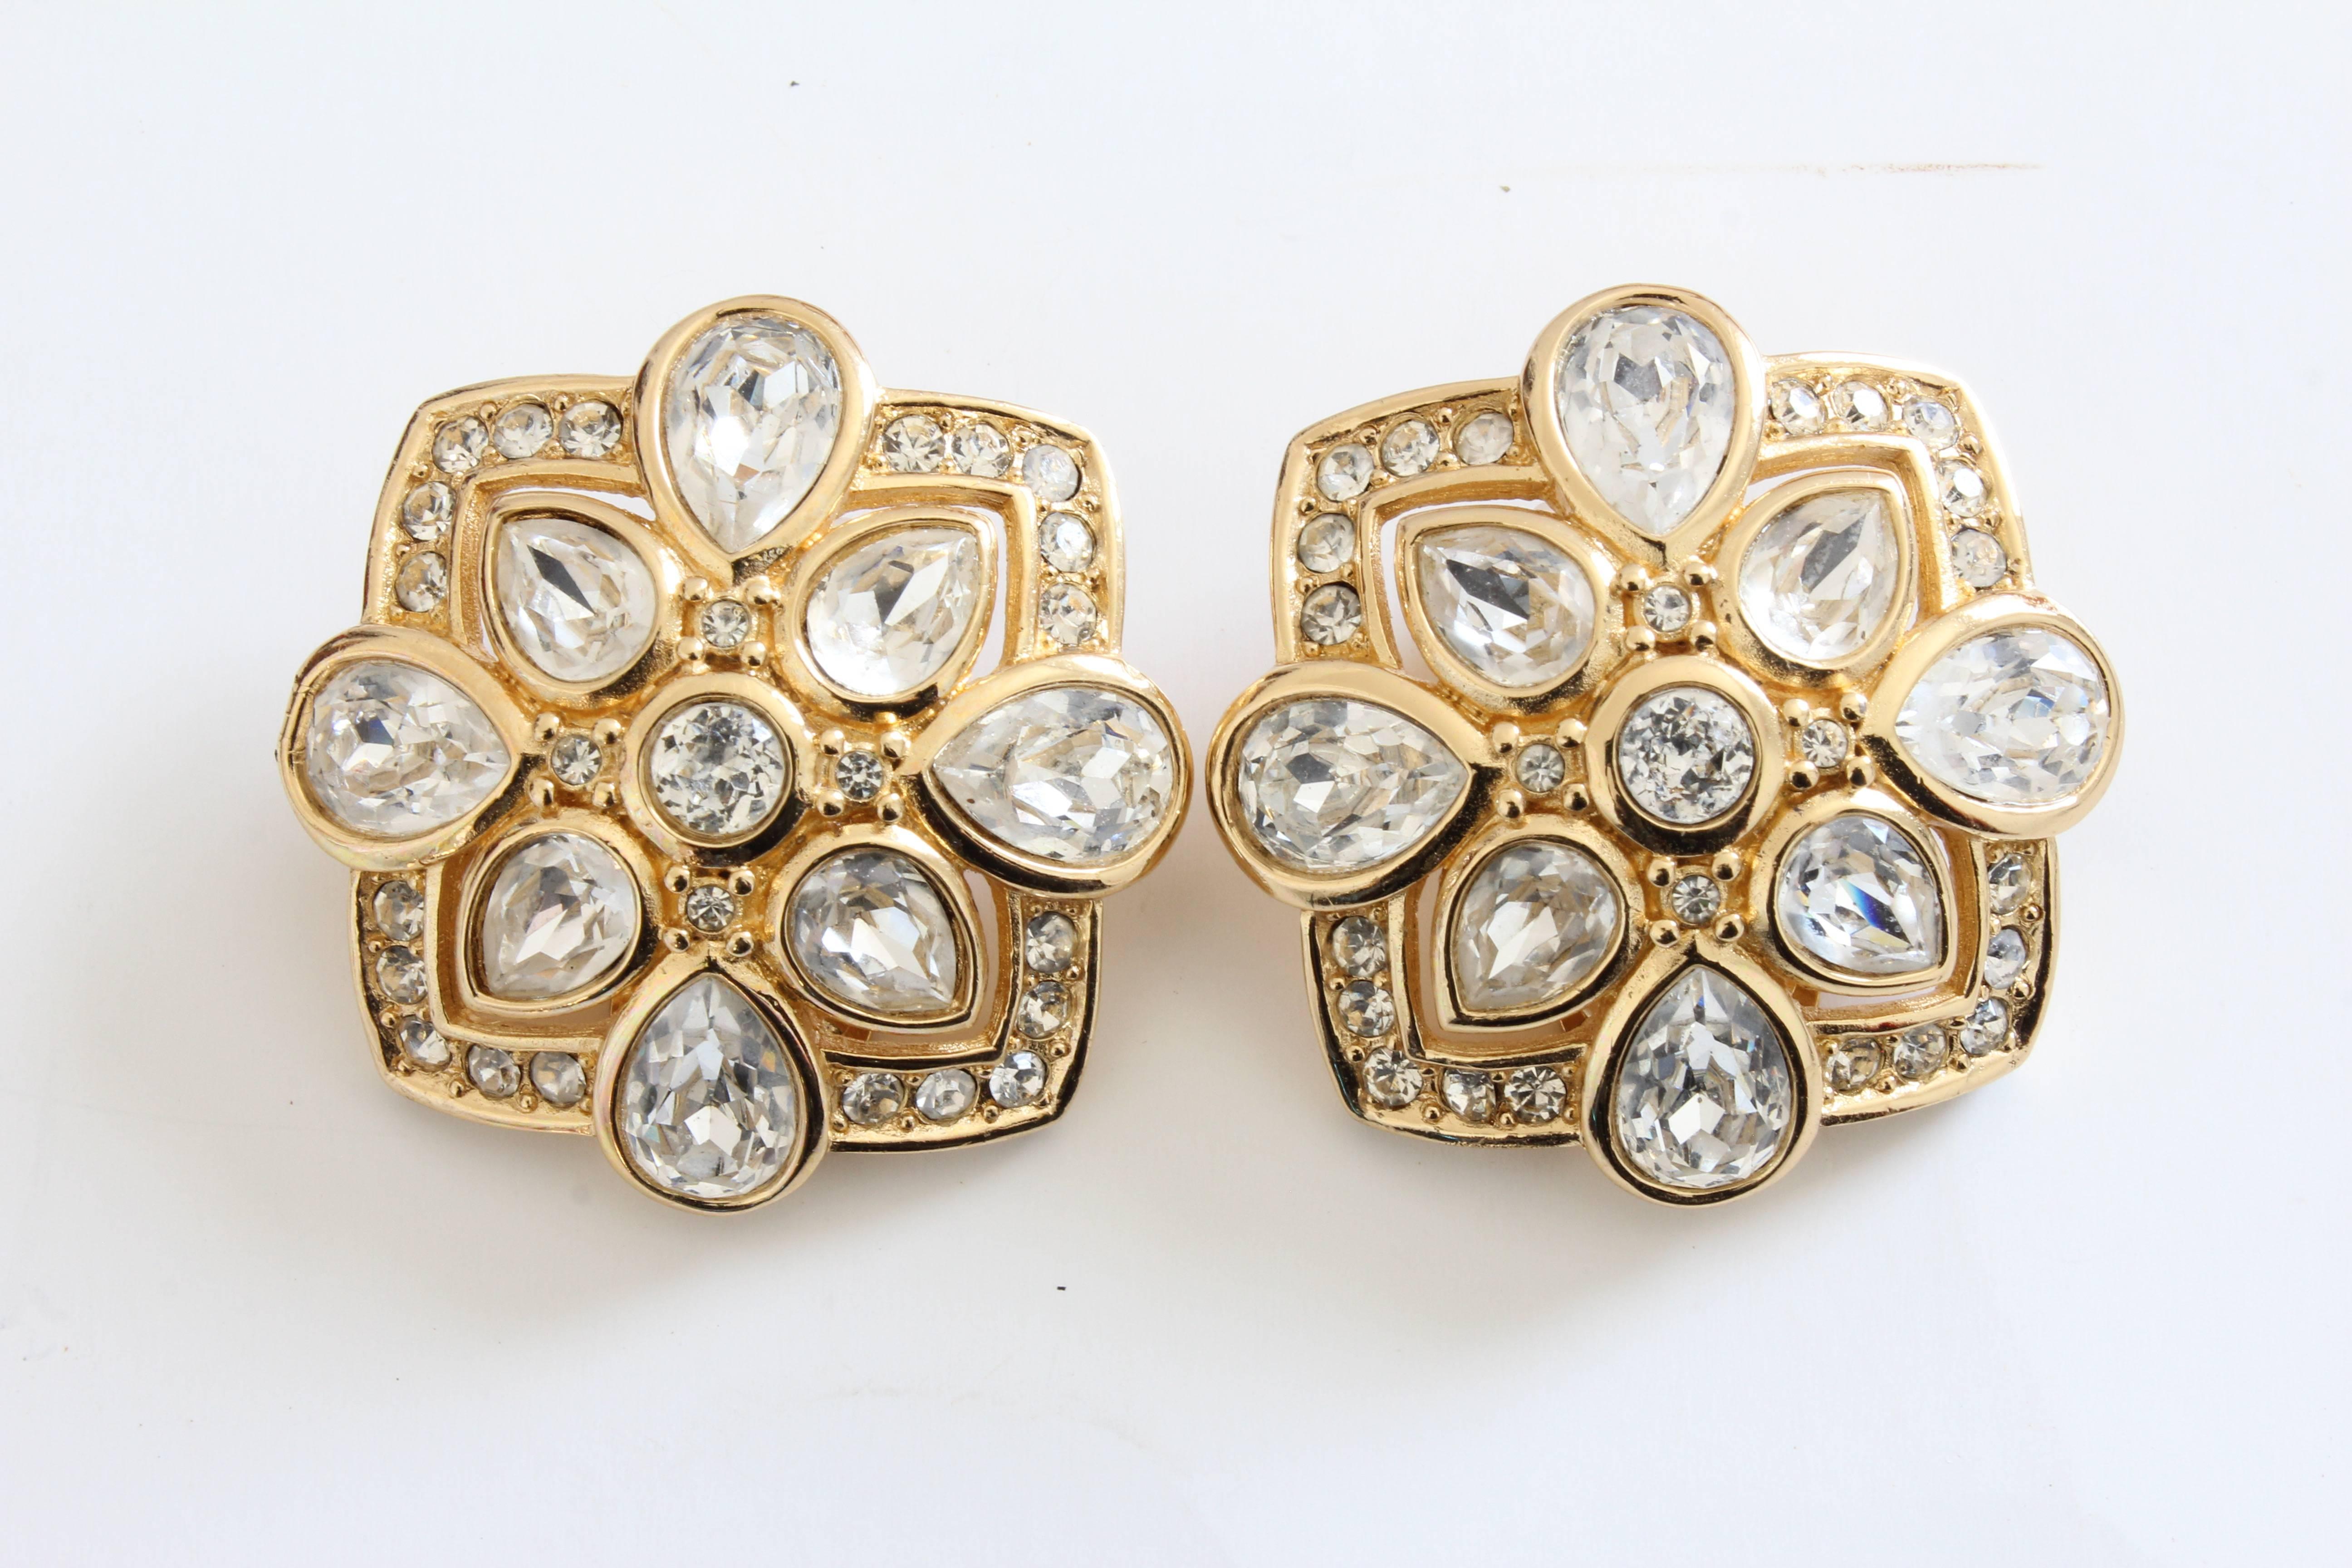 Here's a pair of earrings from Christian Dior, likely made in the 1990s.  Made from gold metal, they feature large pear shaped rhinestones along with smaller inset stones.  Clip style.  In excellent preowned condition.  They measure appx 1.25in